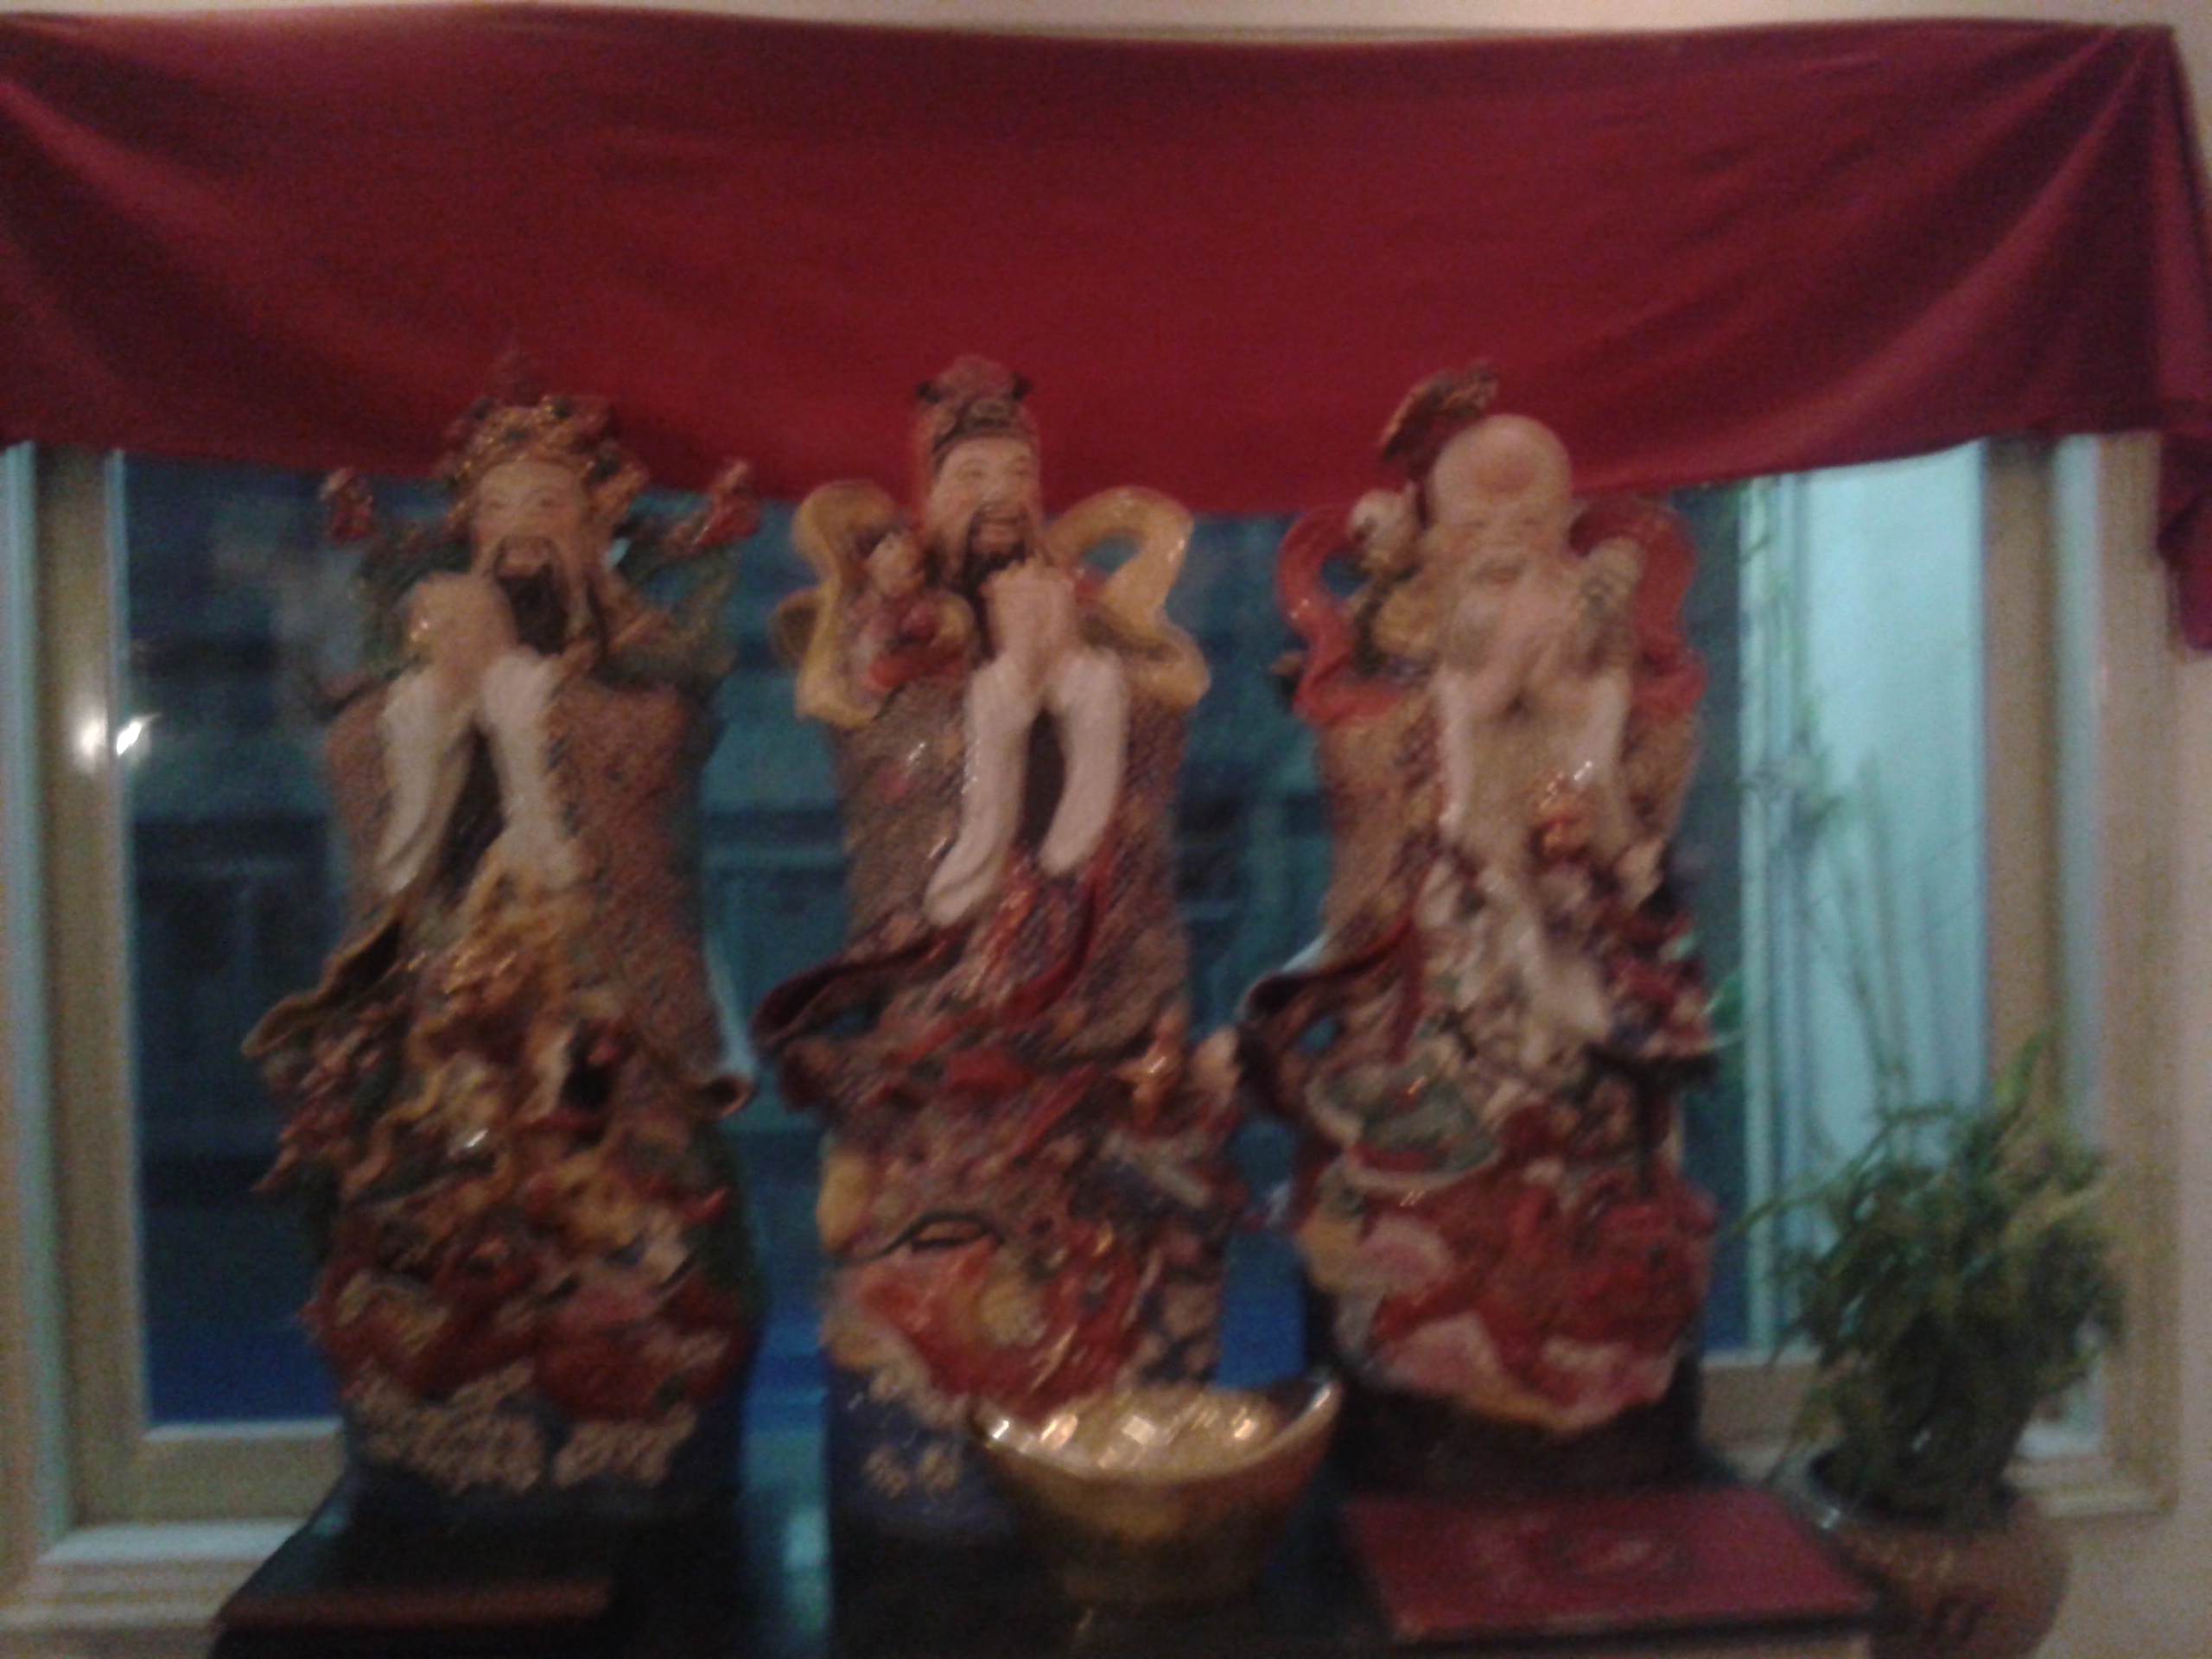 The three statues in Hotel Heiking 